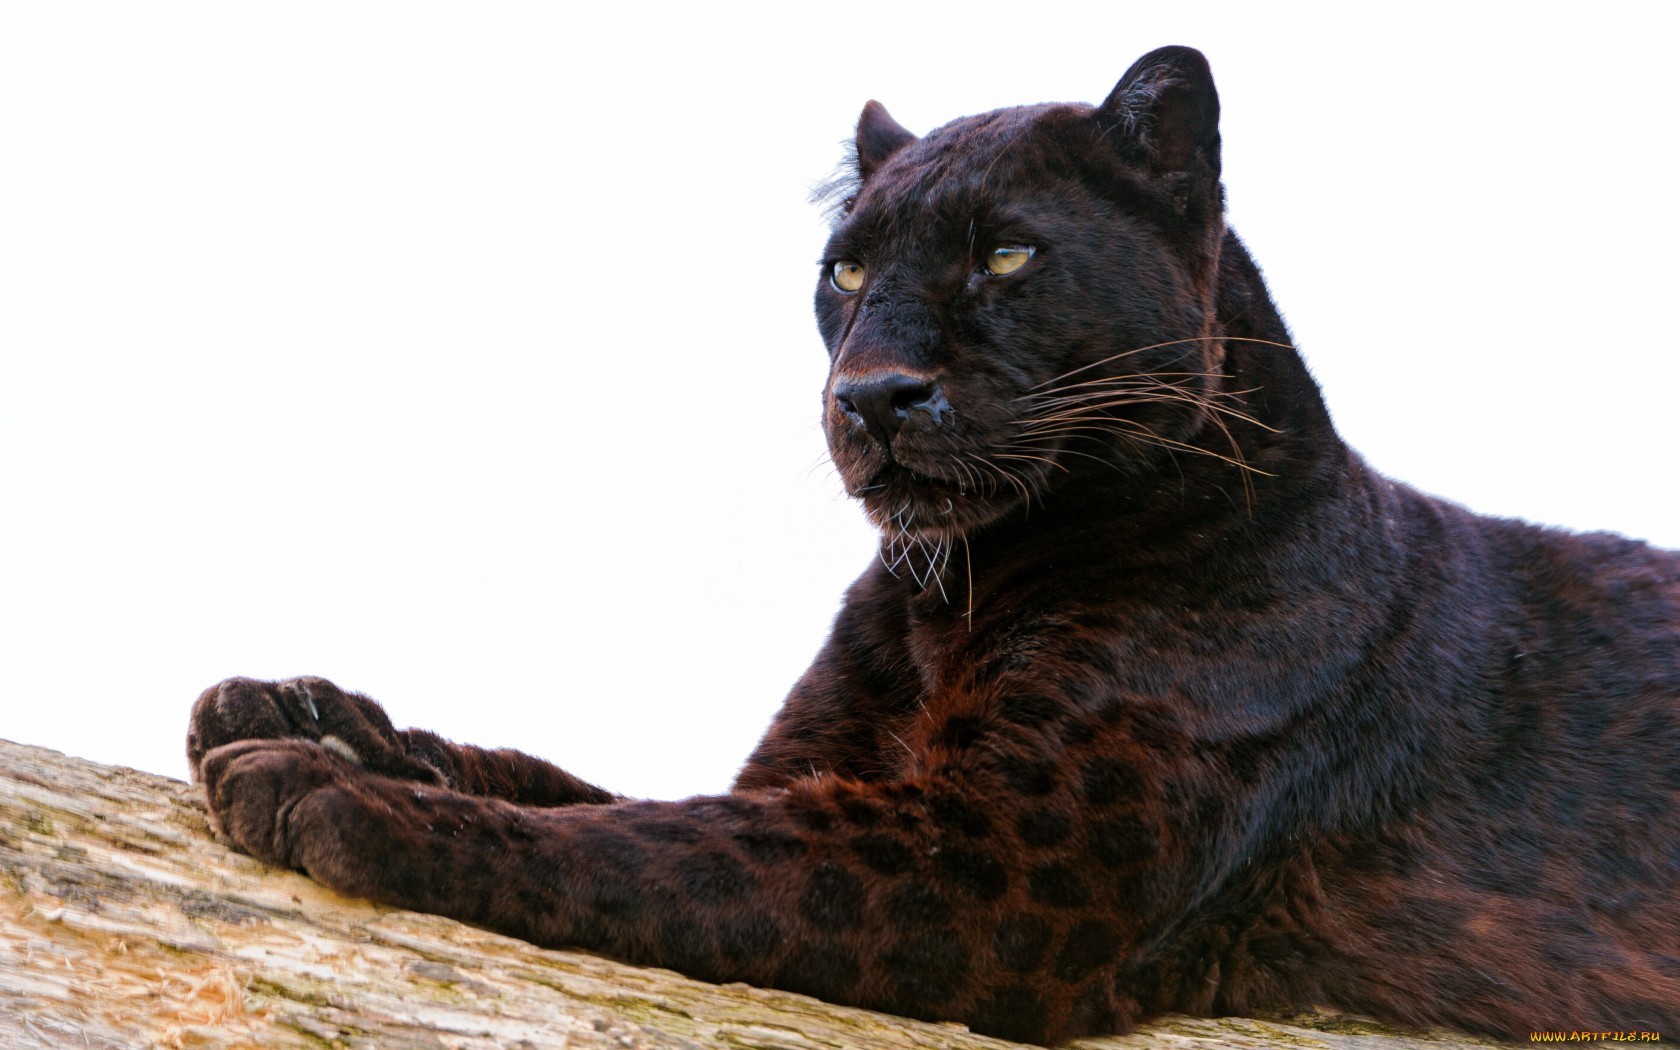 14533 download wallpaper animals, panthers screensavers and pictures for free